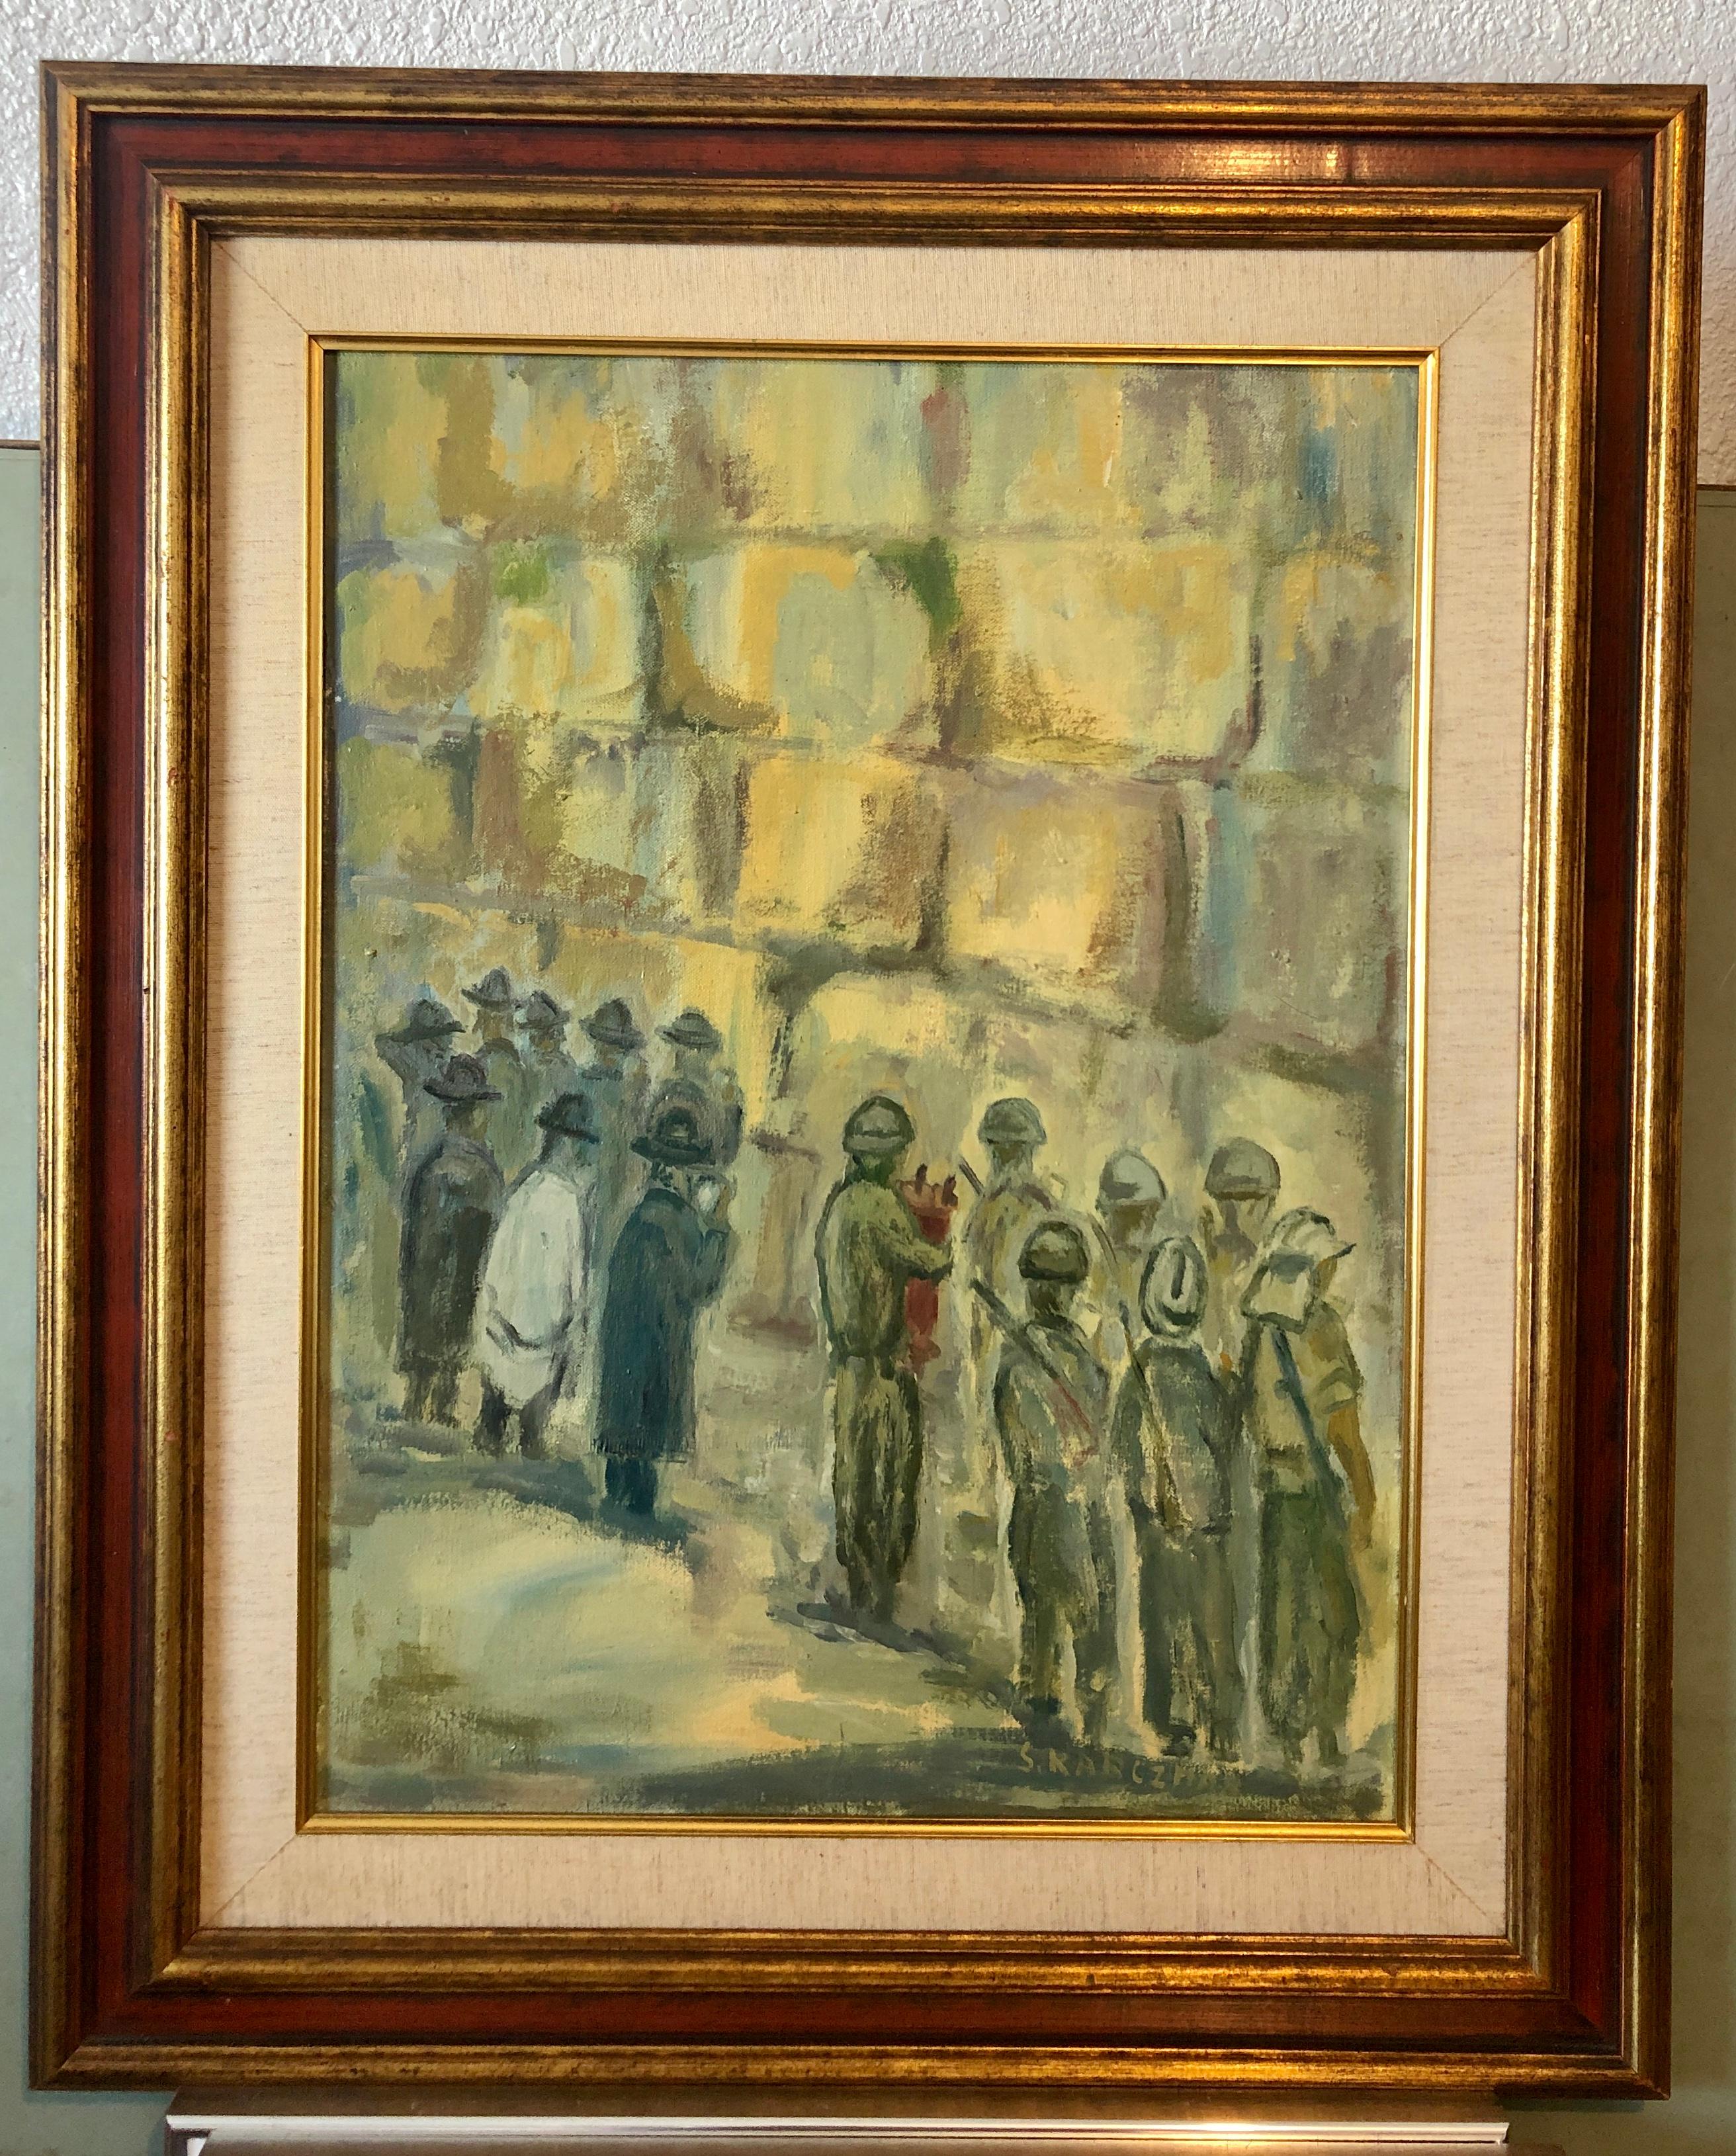 Israeli Tzahal, IDF Soldiers and Chassidic men praying and dancing at the Kotel, Western Wall in jerusalem israel. Fine oil painting.
24 x 18 canvas, 32.5 x 27.5 inches with frame.
 
Simon Natan Karczmar (born November 1, 1903 in Warsaw , died 1982